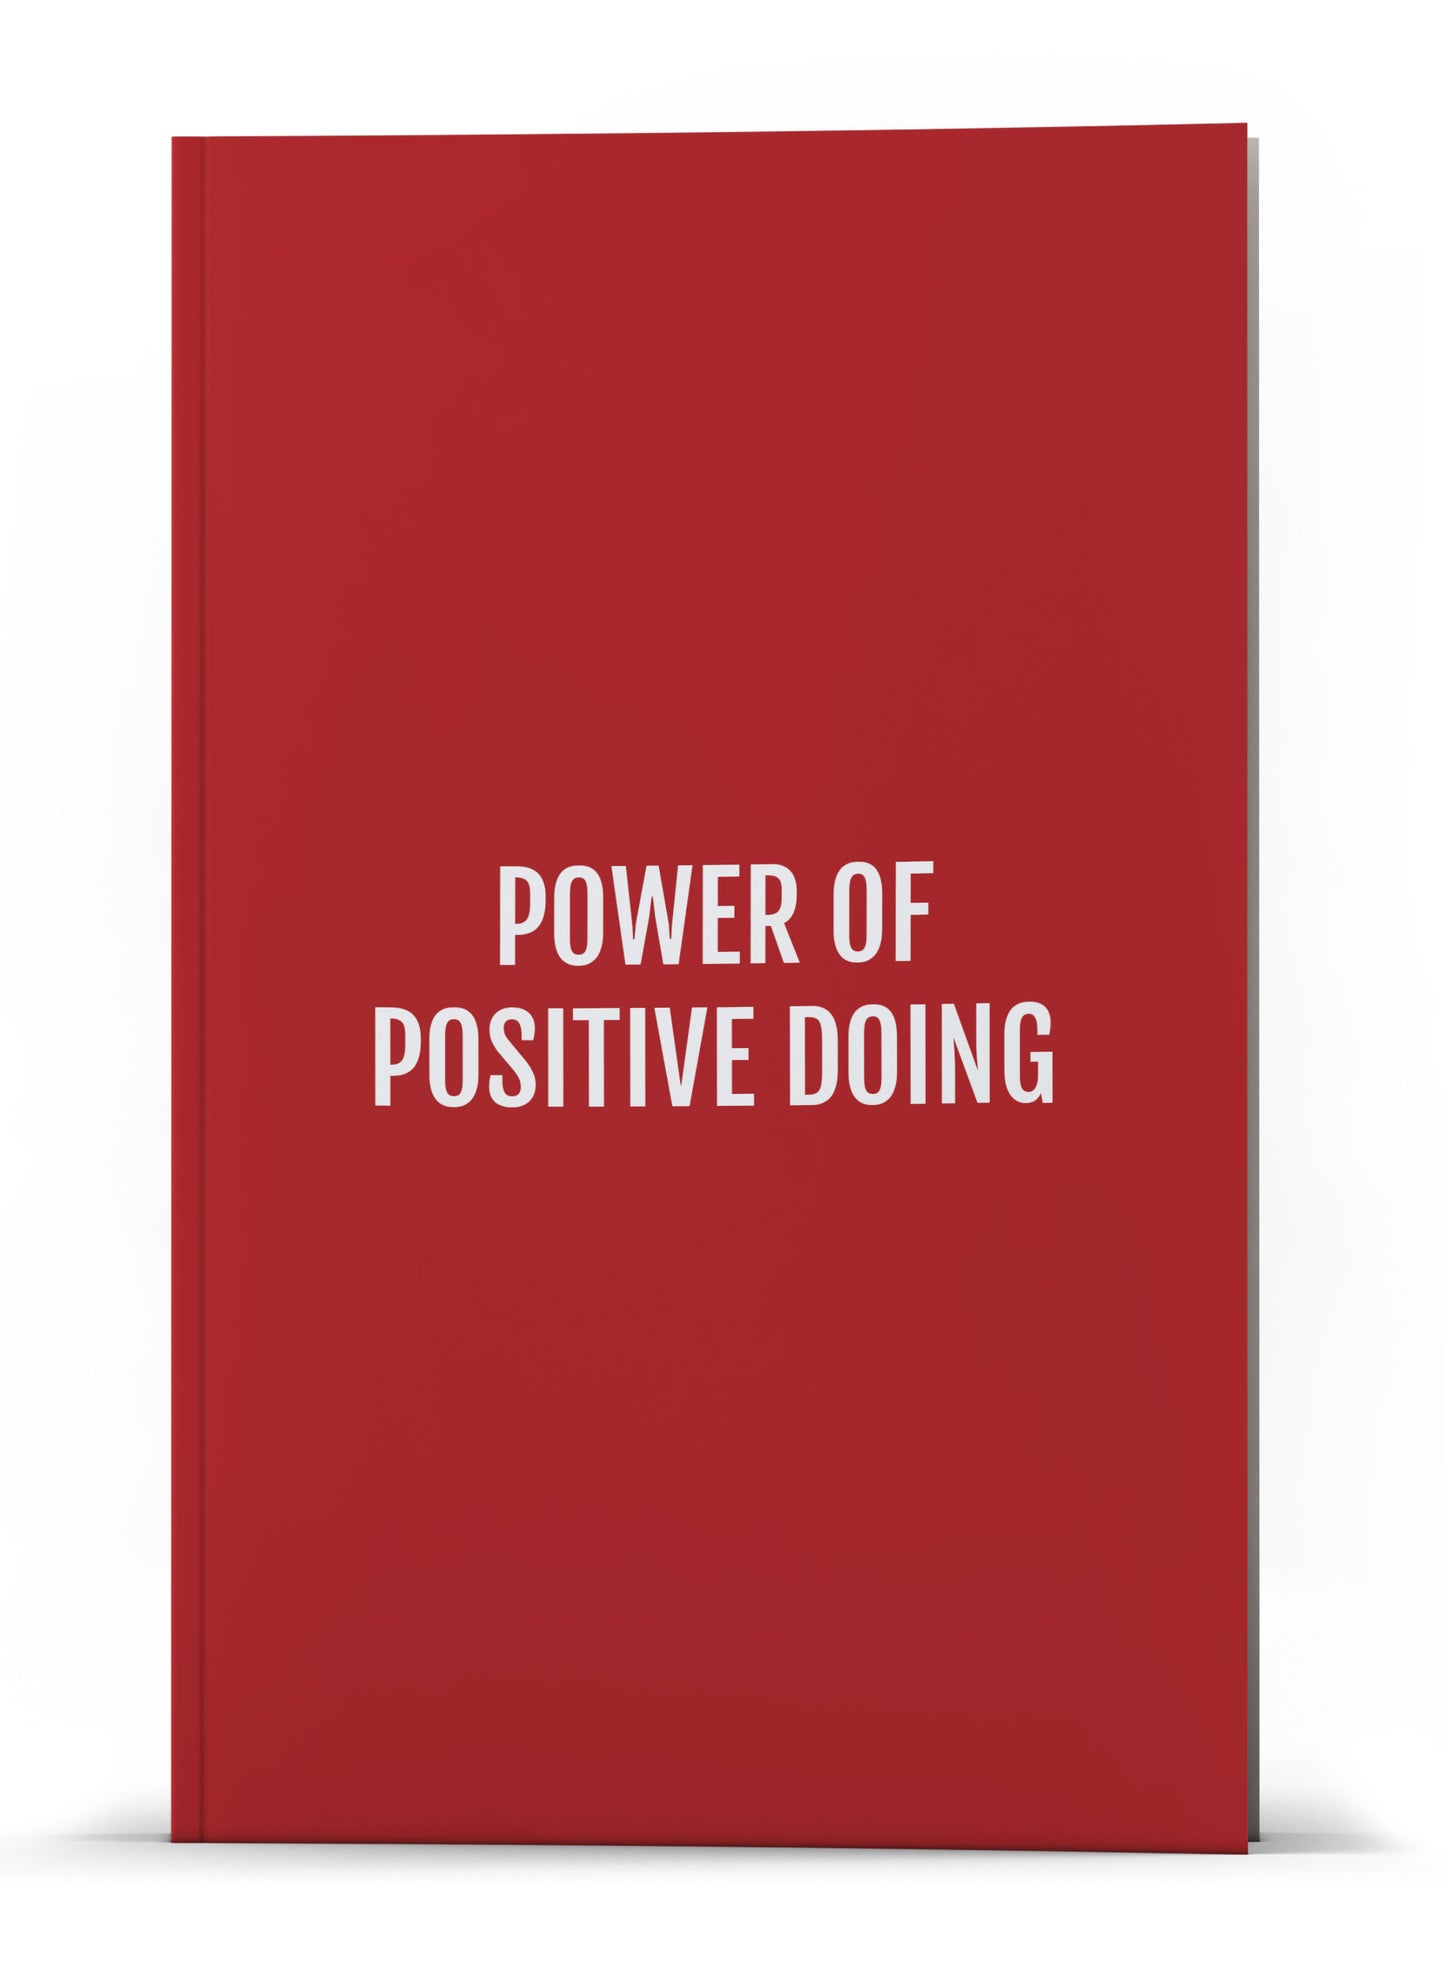 POWER OF POSITIVE DOING